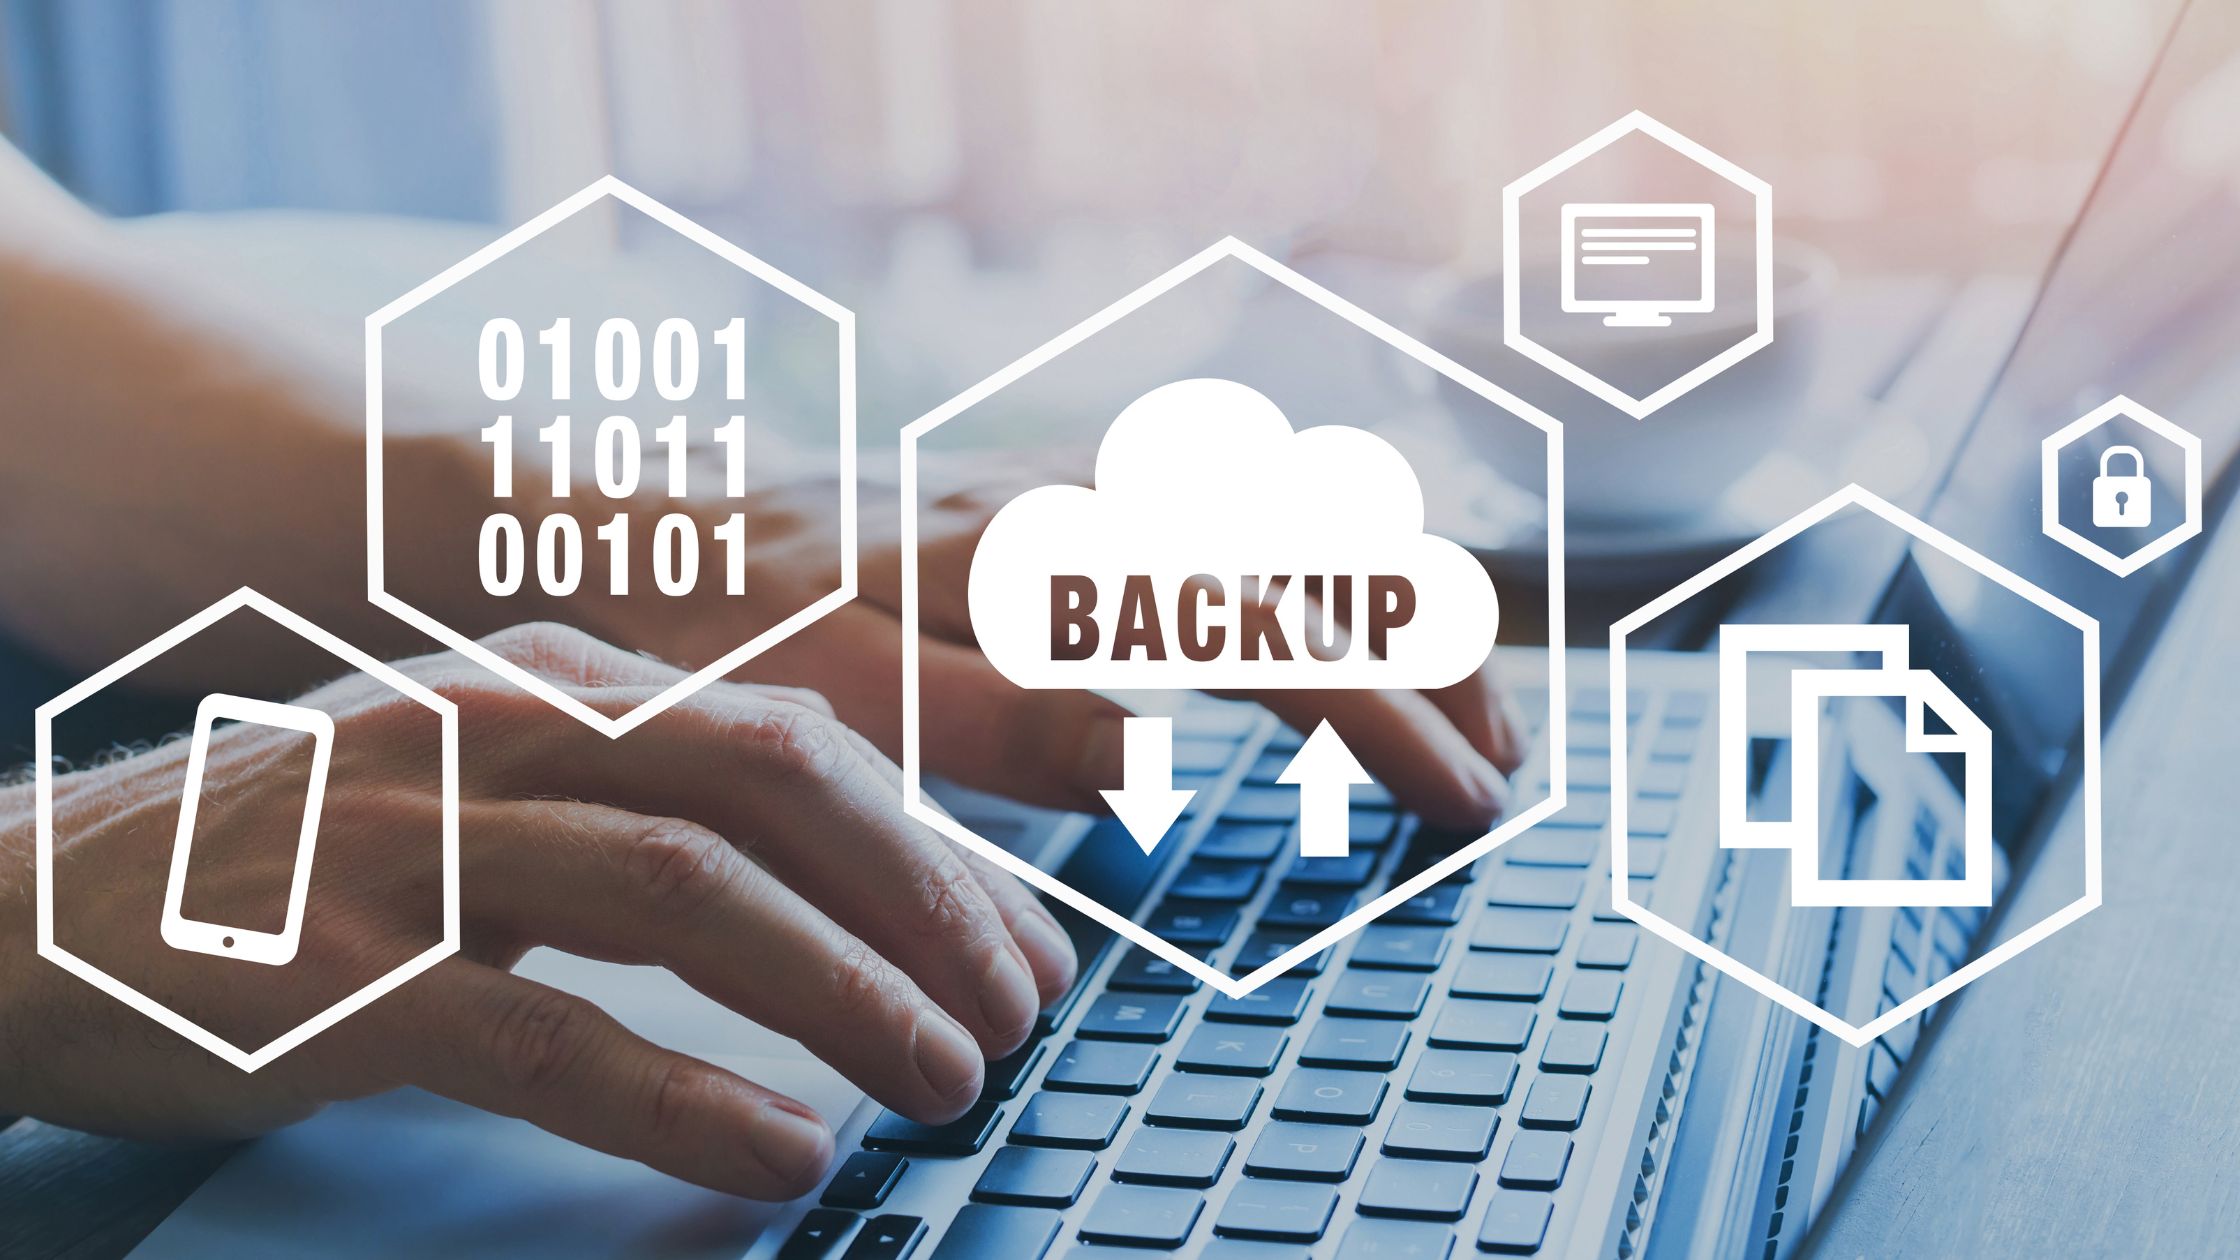 Disaster Recovery in the Cloud: What You Need to Know